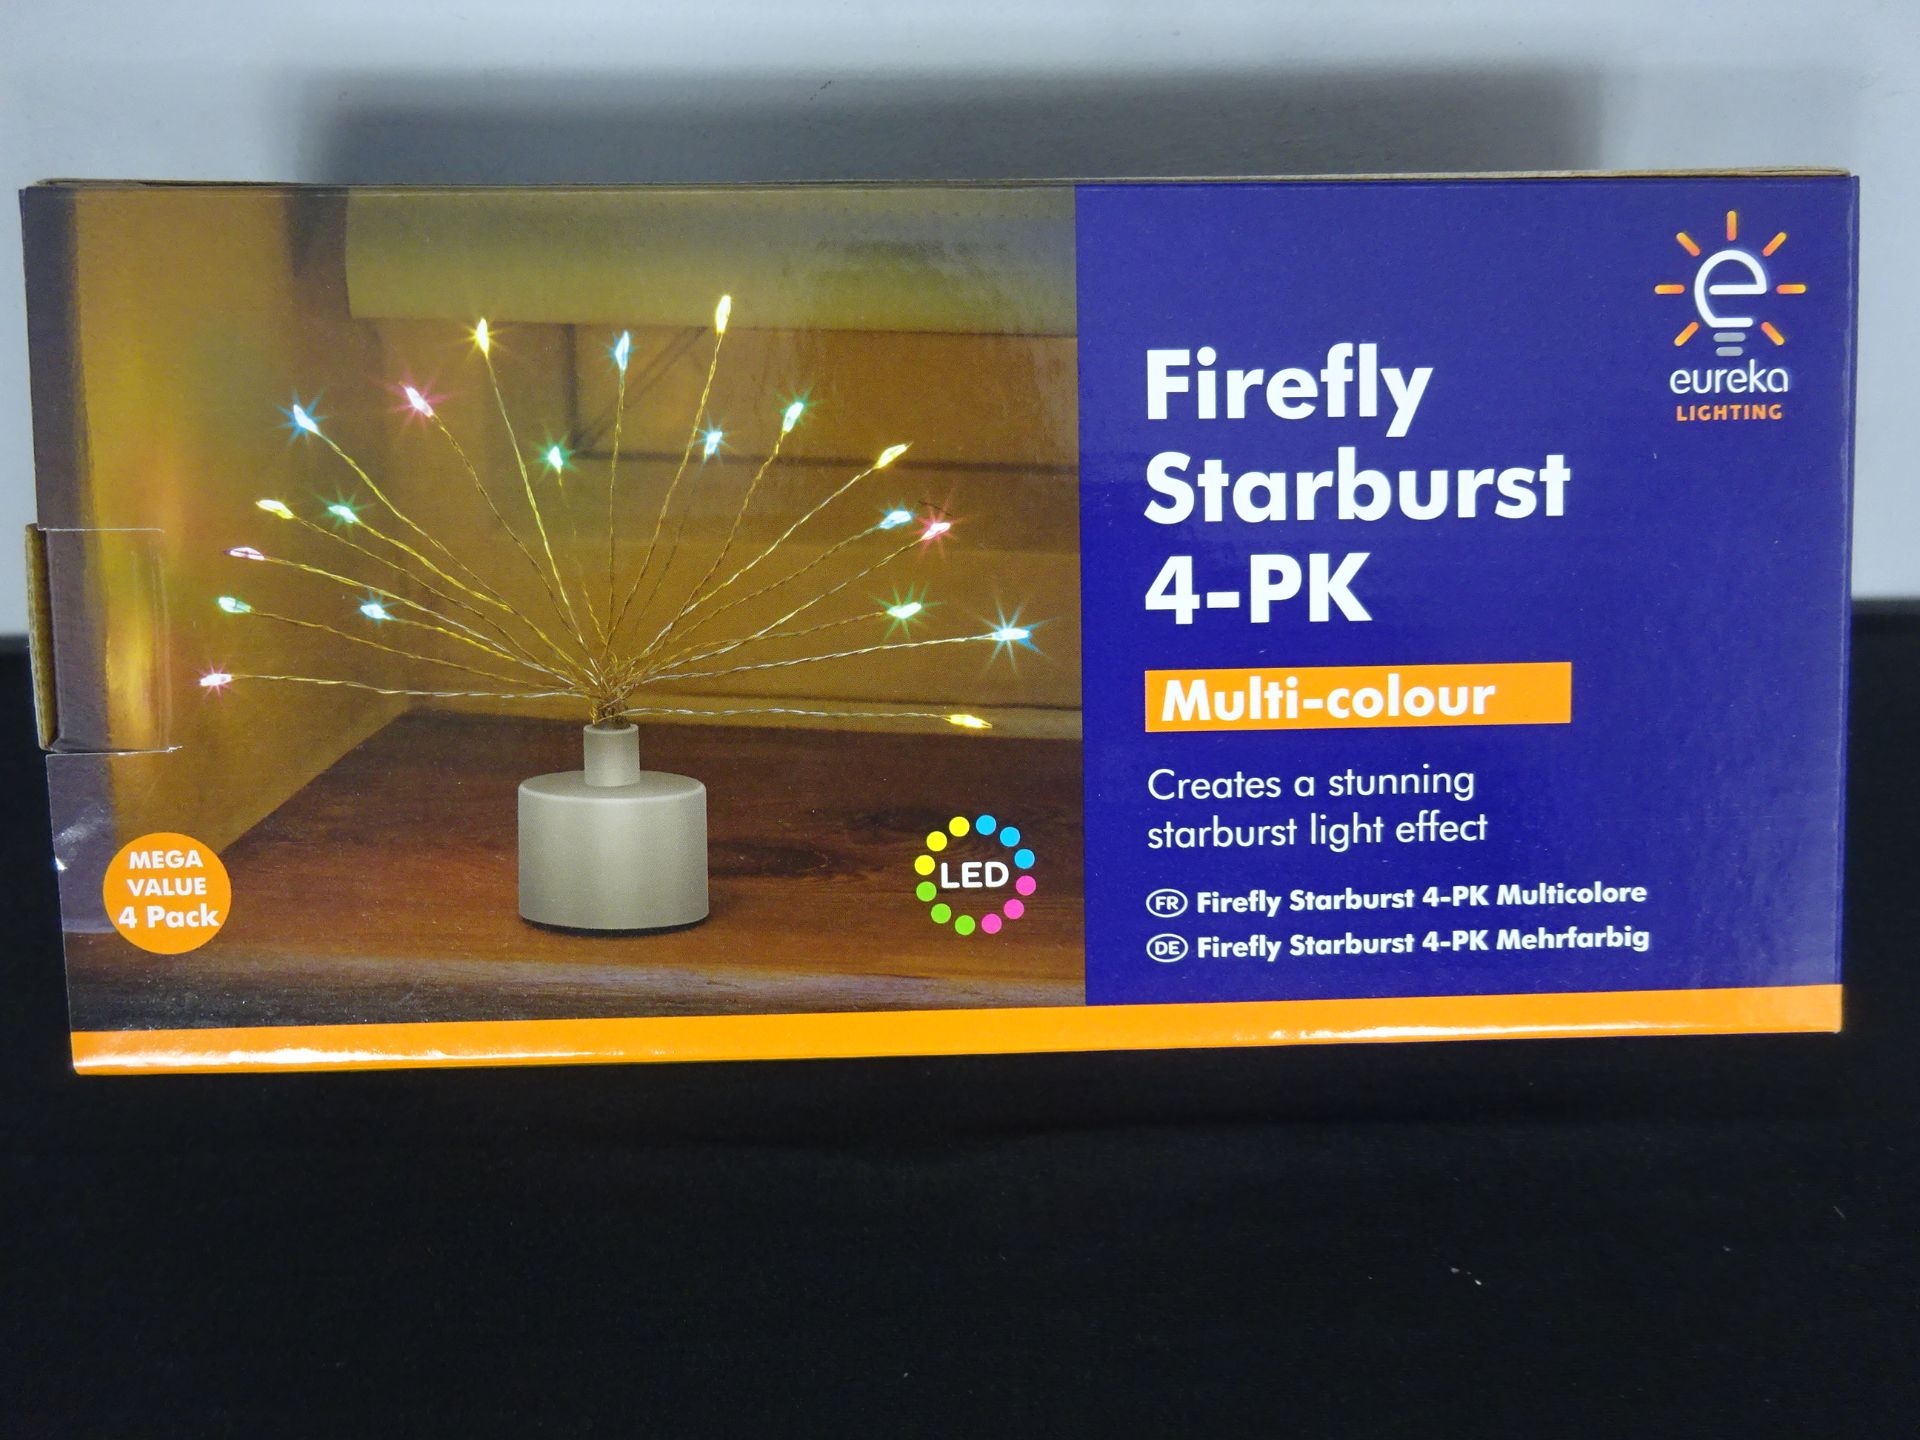 New 4 Pack Of Multi-Colour FireFly Starburst LED Lights With Batteries - Image 2 of 2